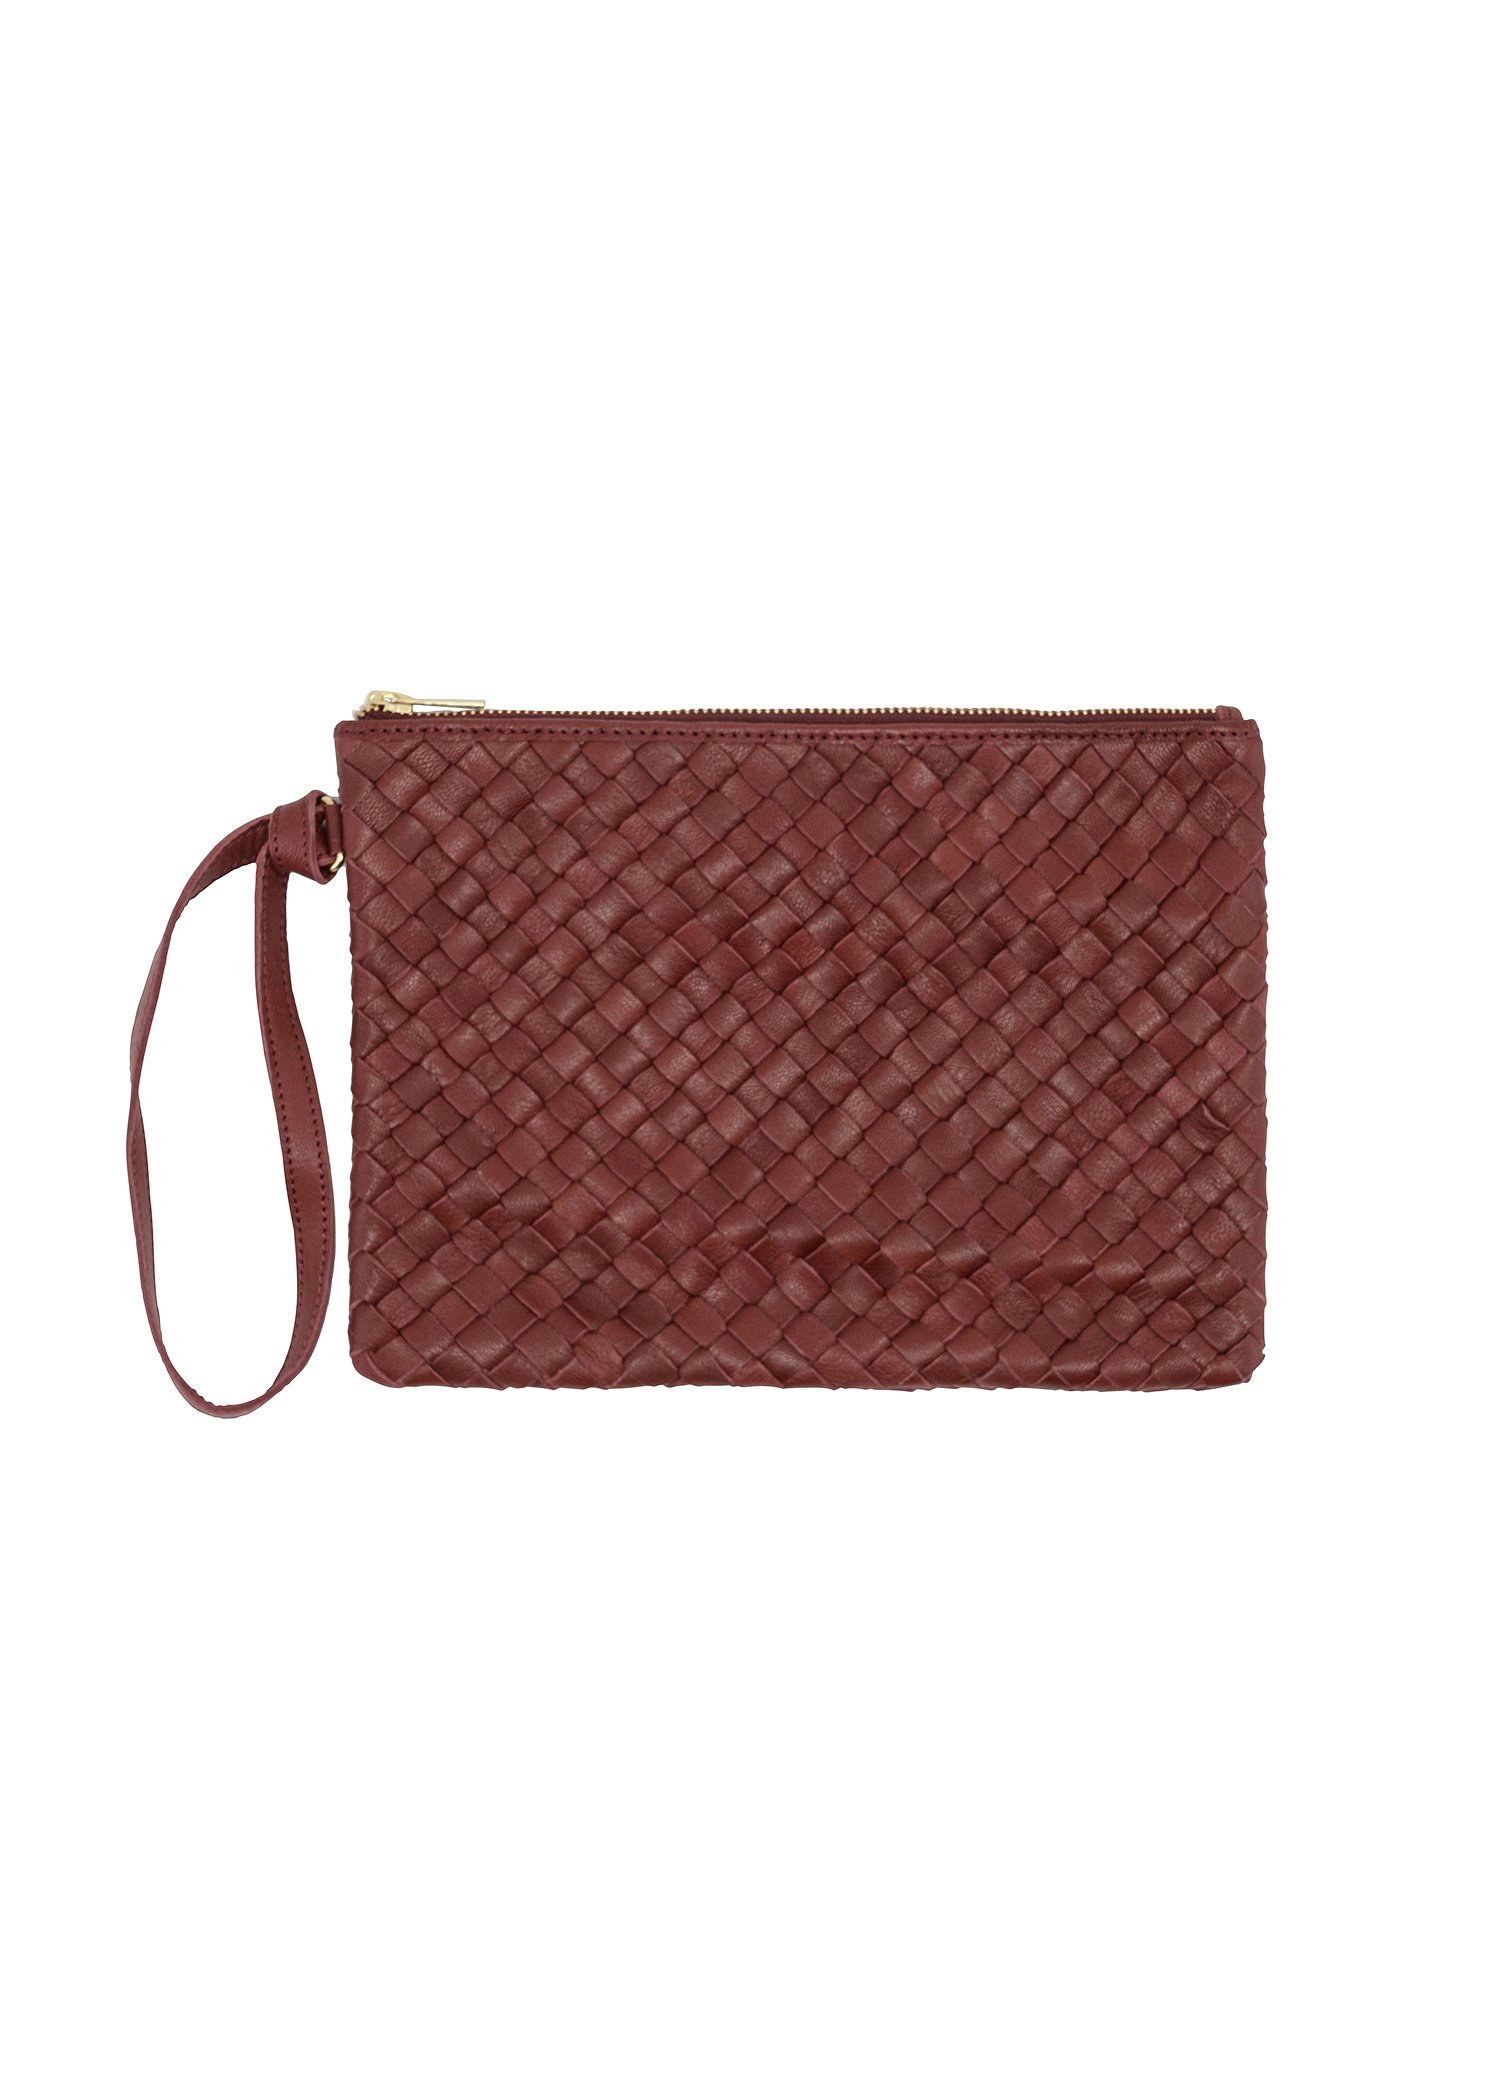 Weaved leather clutch